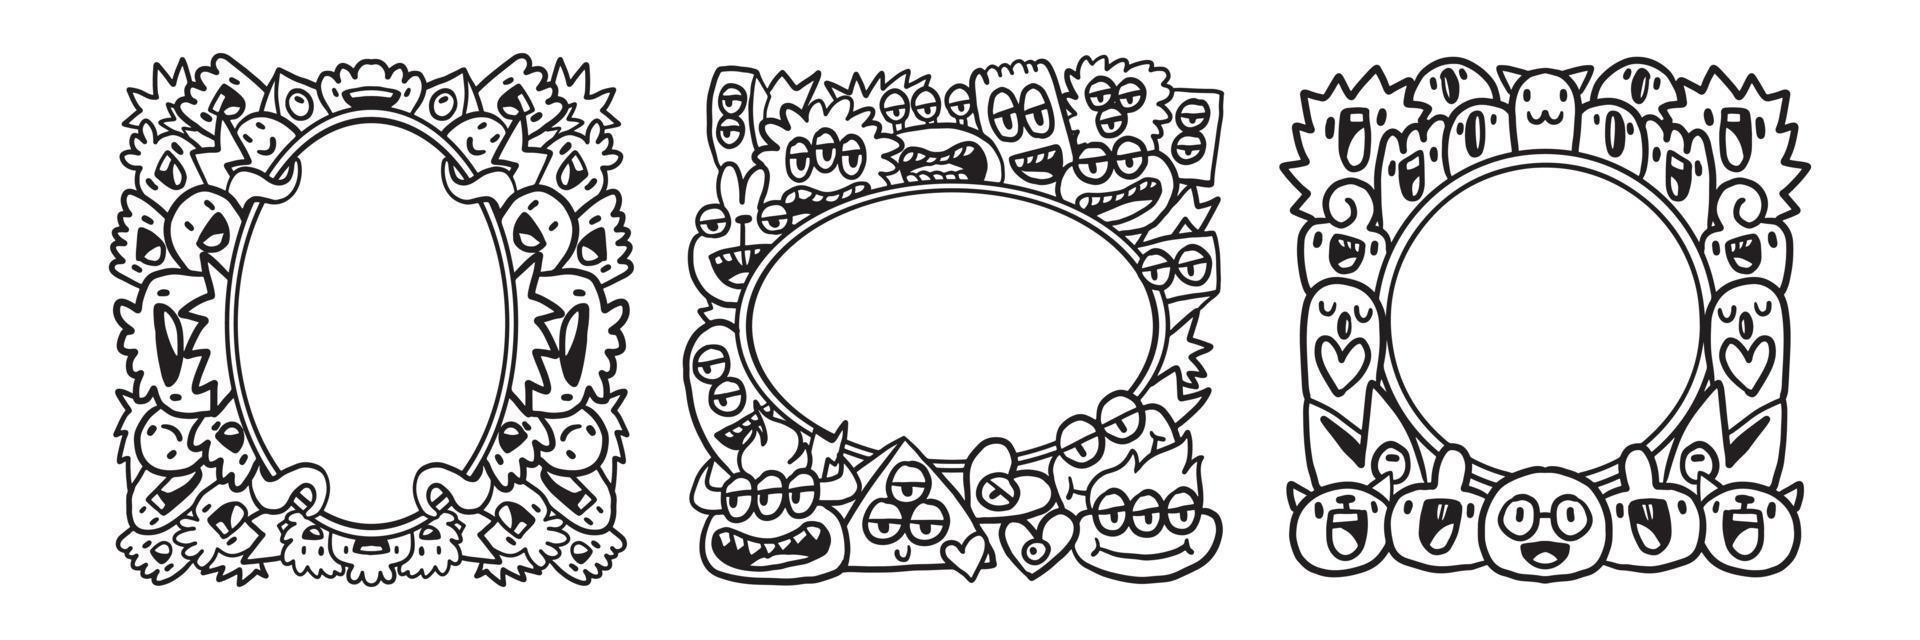 Hand drawn Abstrack doodle art frame Collection vector